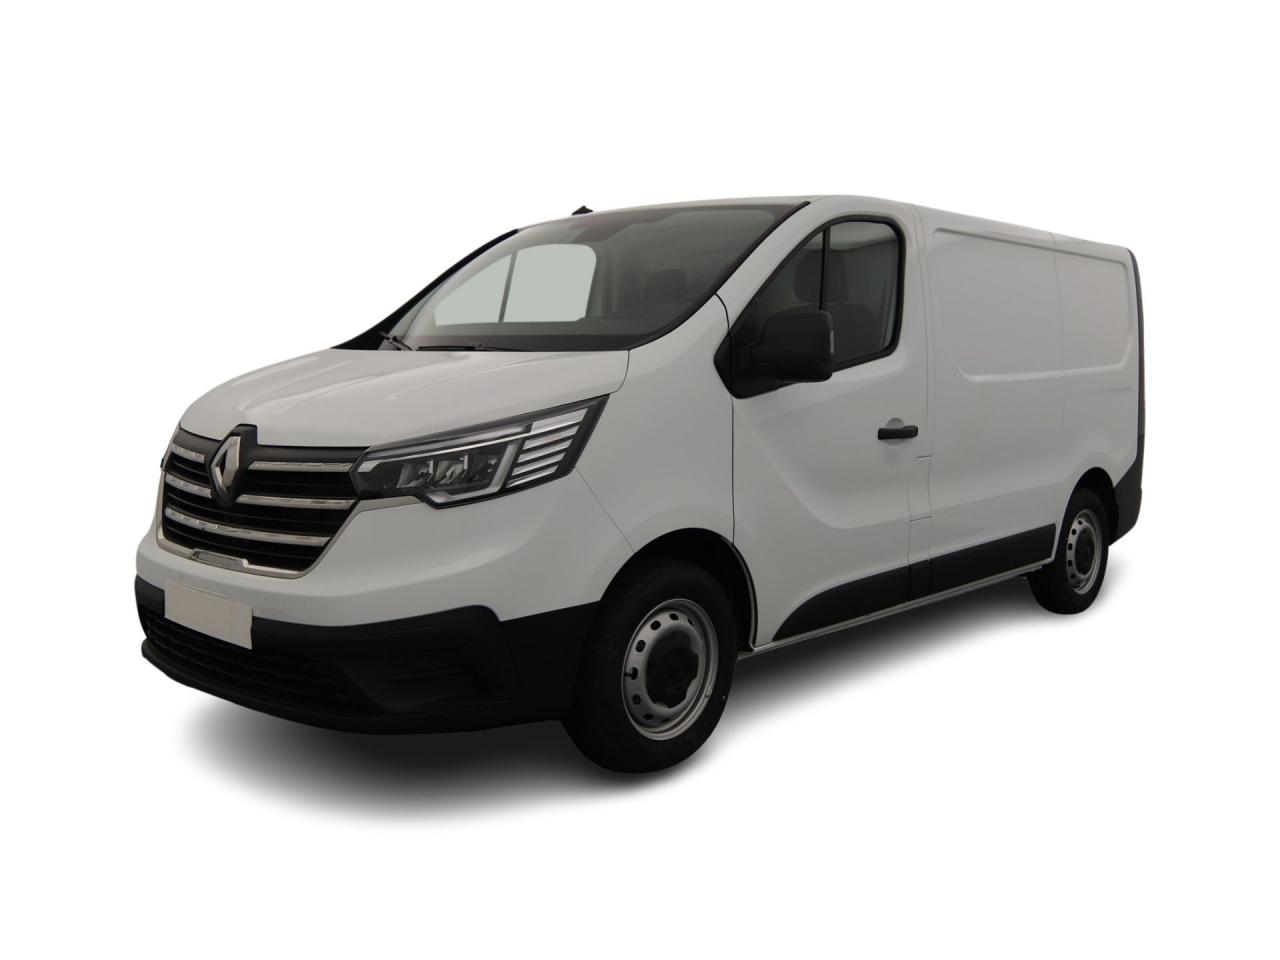 RENAULT-TRAFIC-Trafic L1H1 2800 Kg 2.0 Blue dCi - 130  III FOURGON Fourgon Grand Confort L1H1 PHASE 3